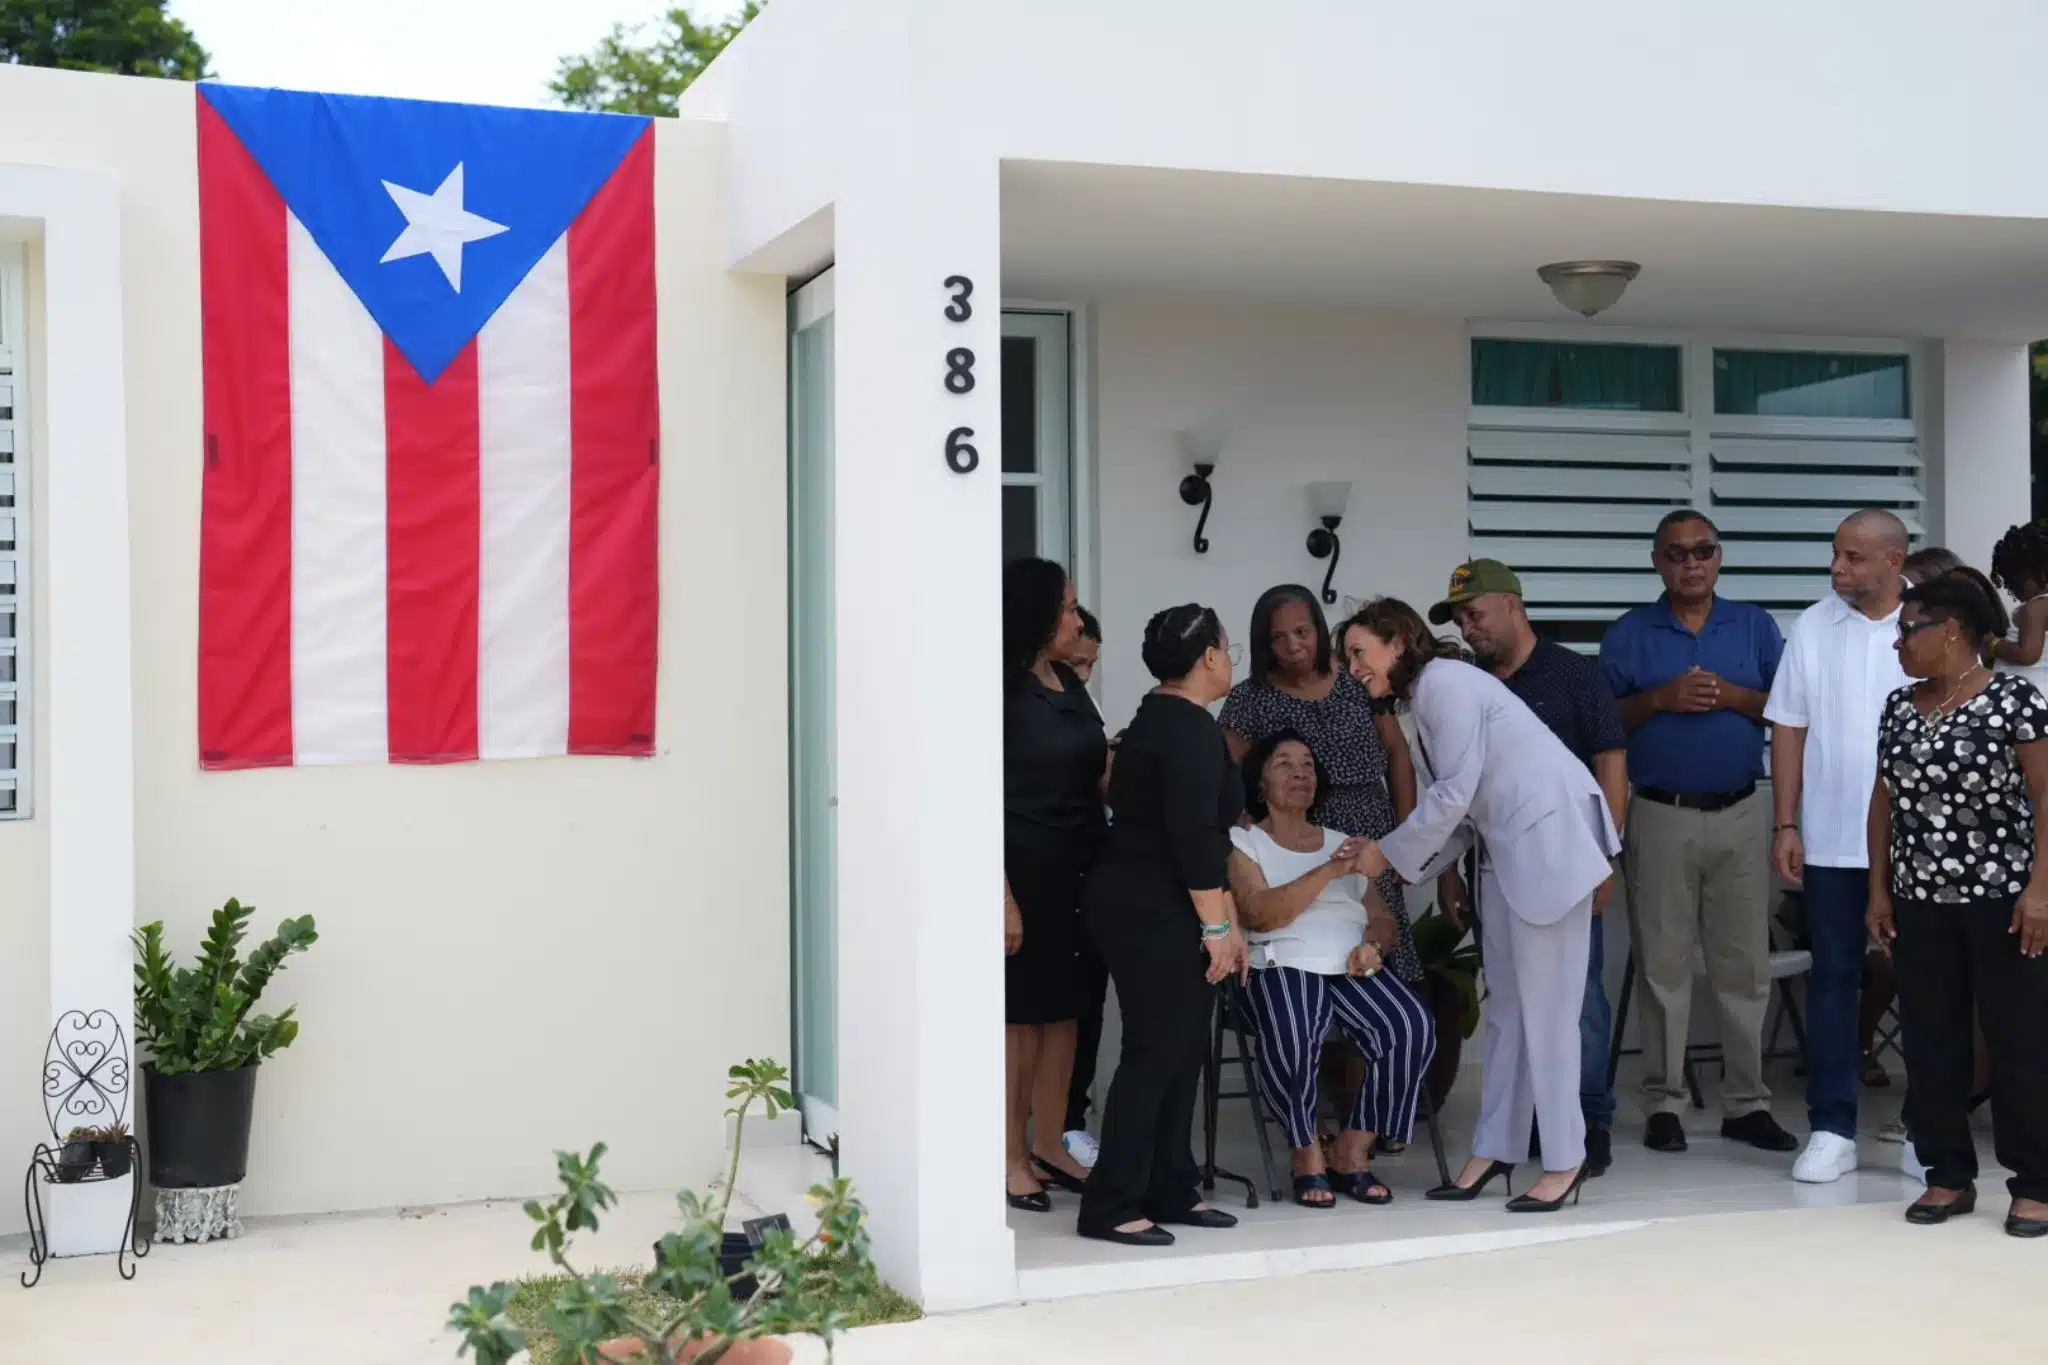 In seeking connection to Puerto Rico, Vice President Kamala Harris finds a complicated picture